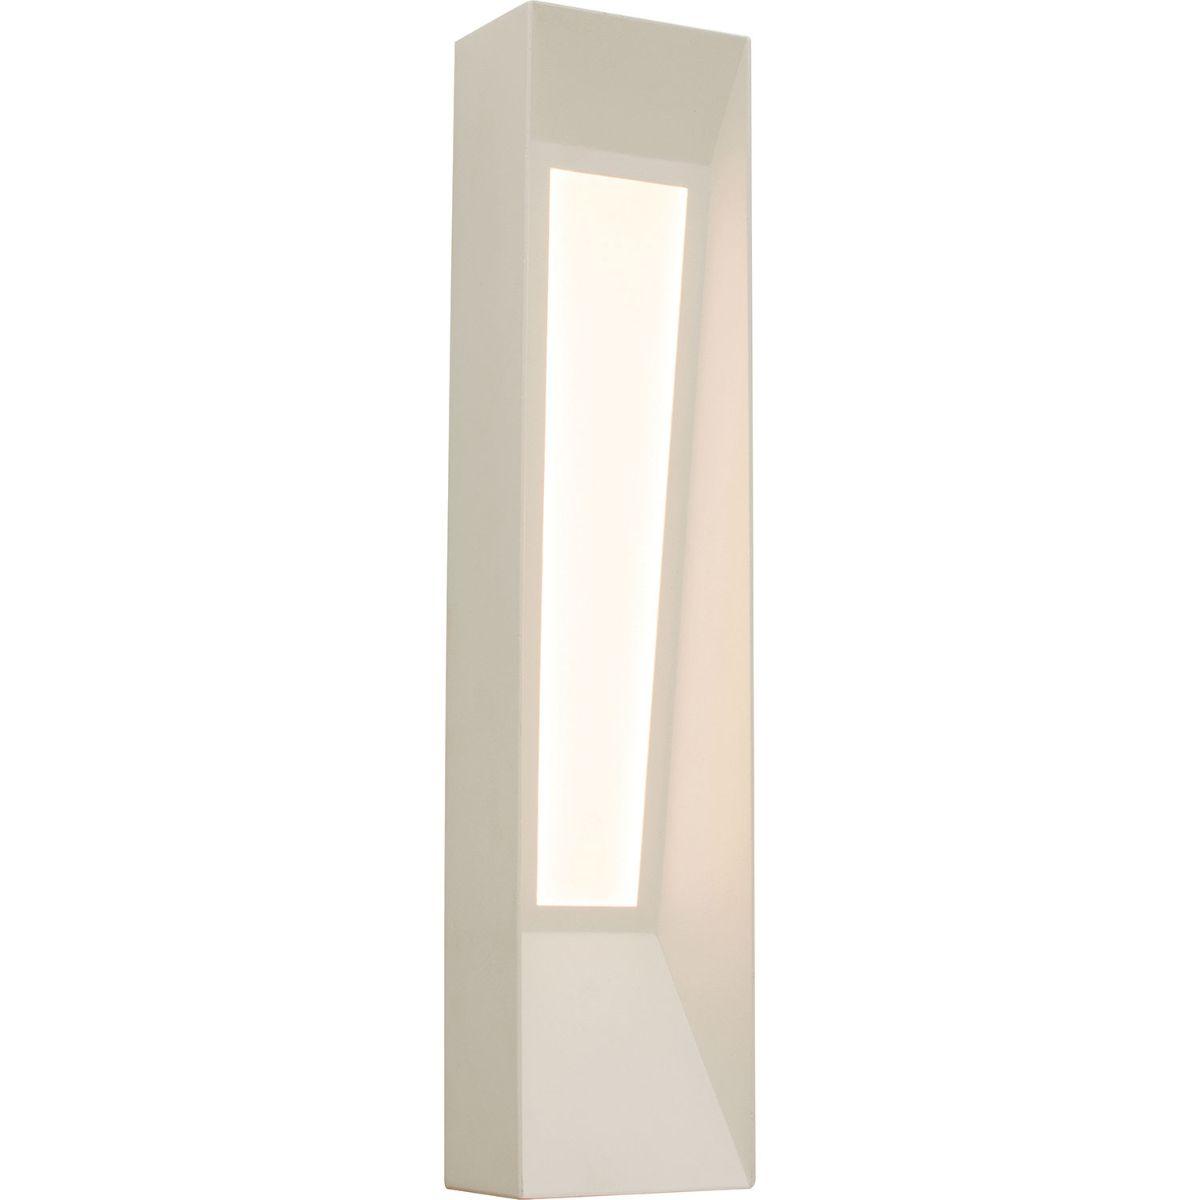 Rowan 18 in. LED Outdoor Wall Sconce